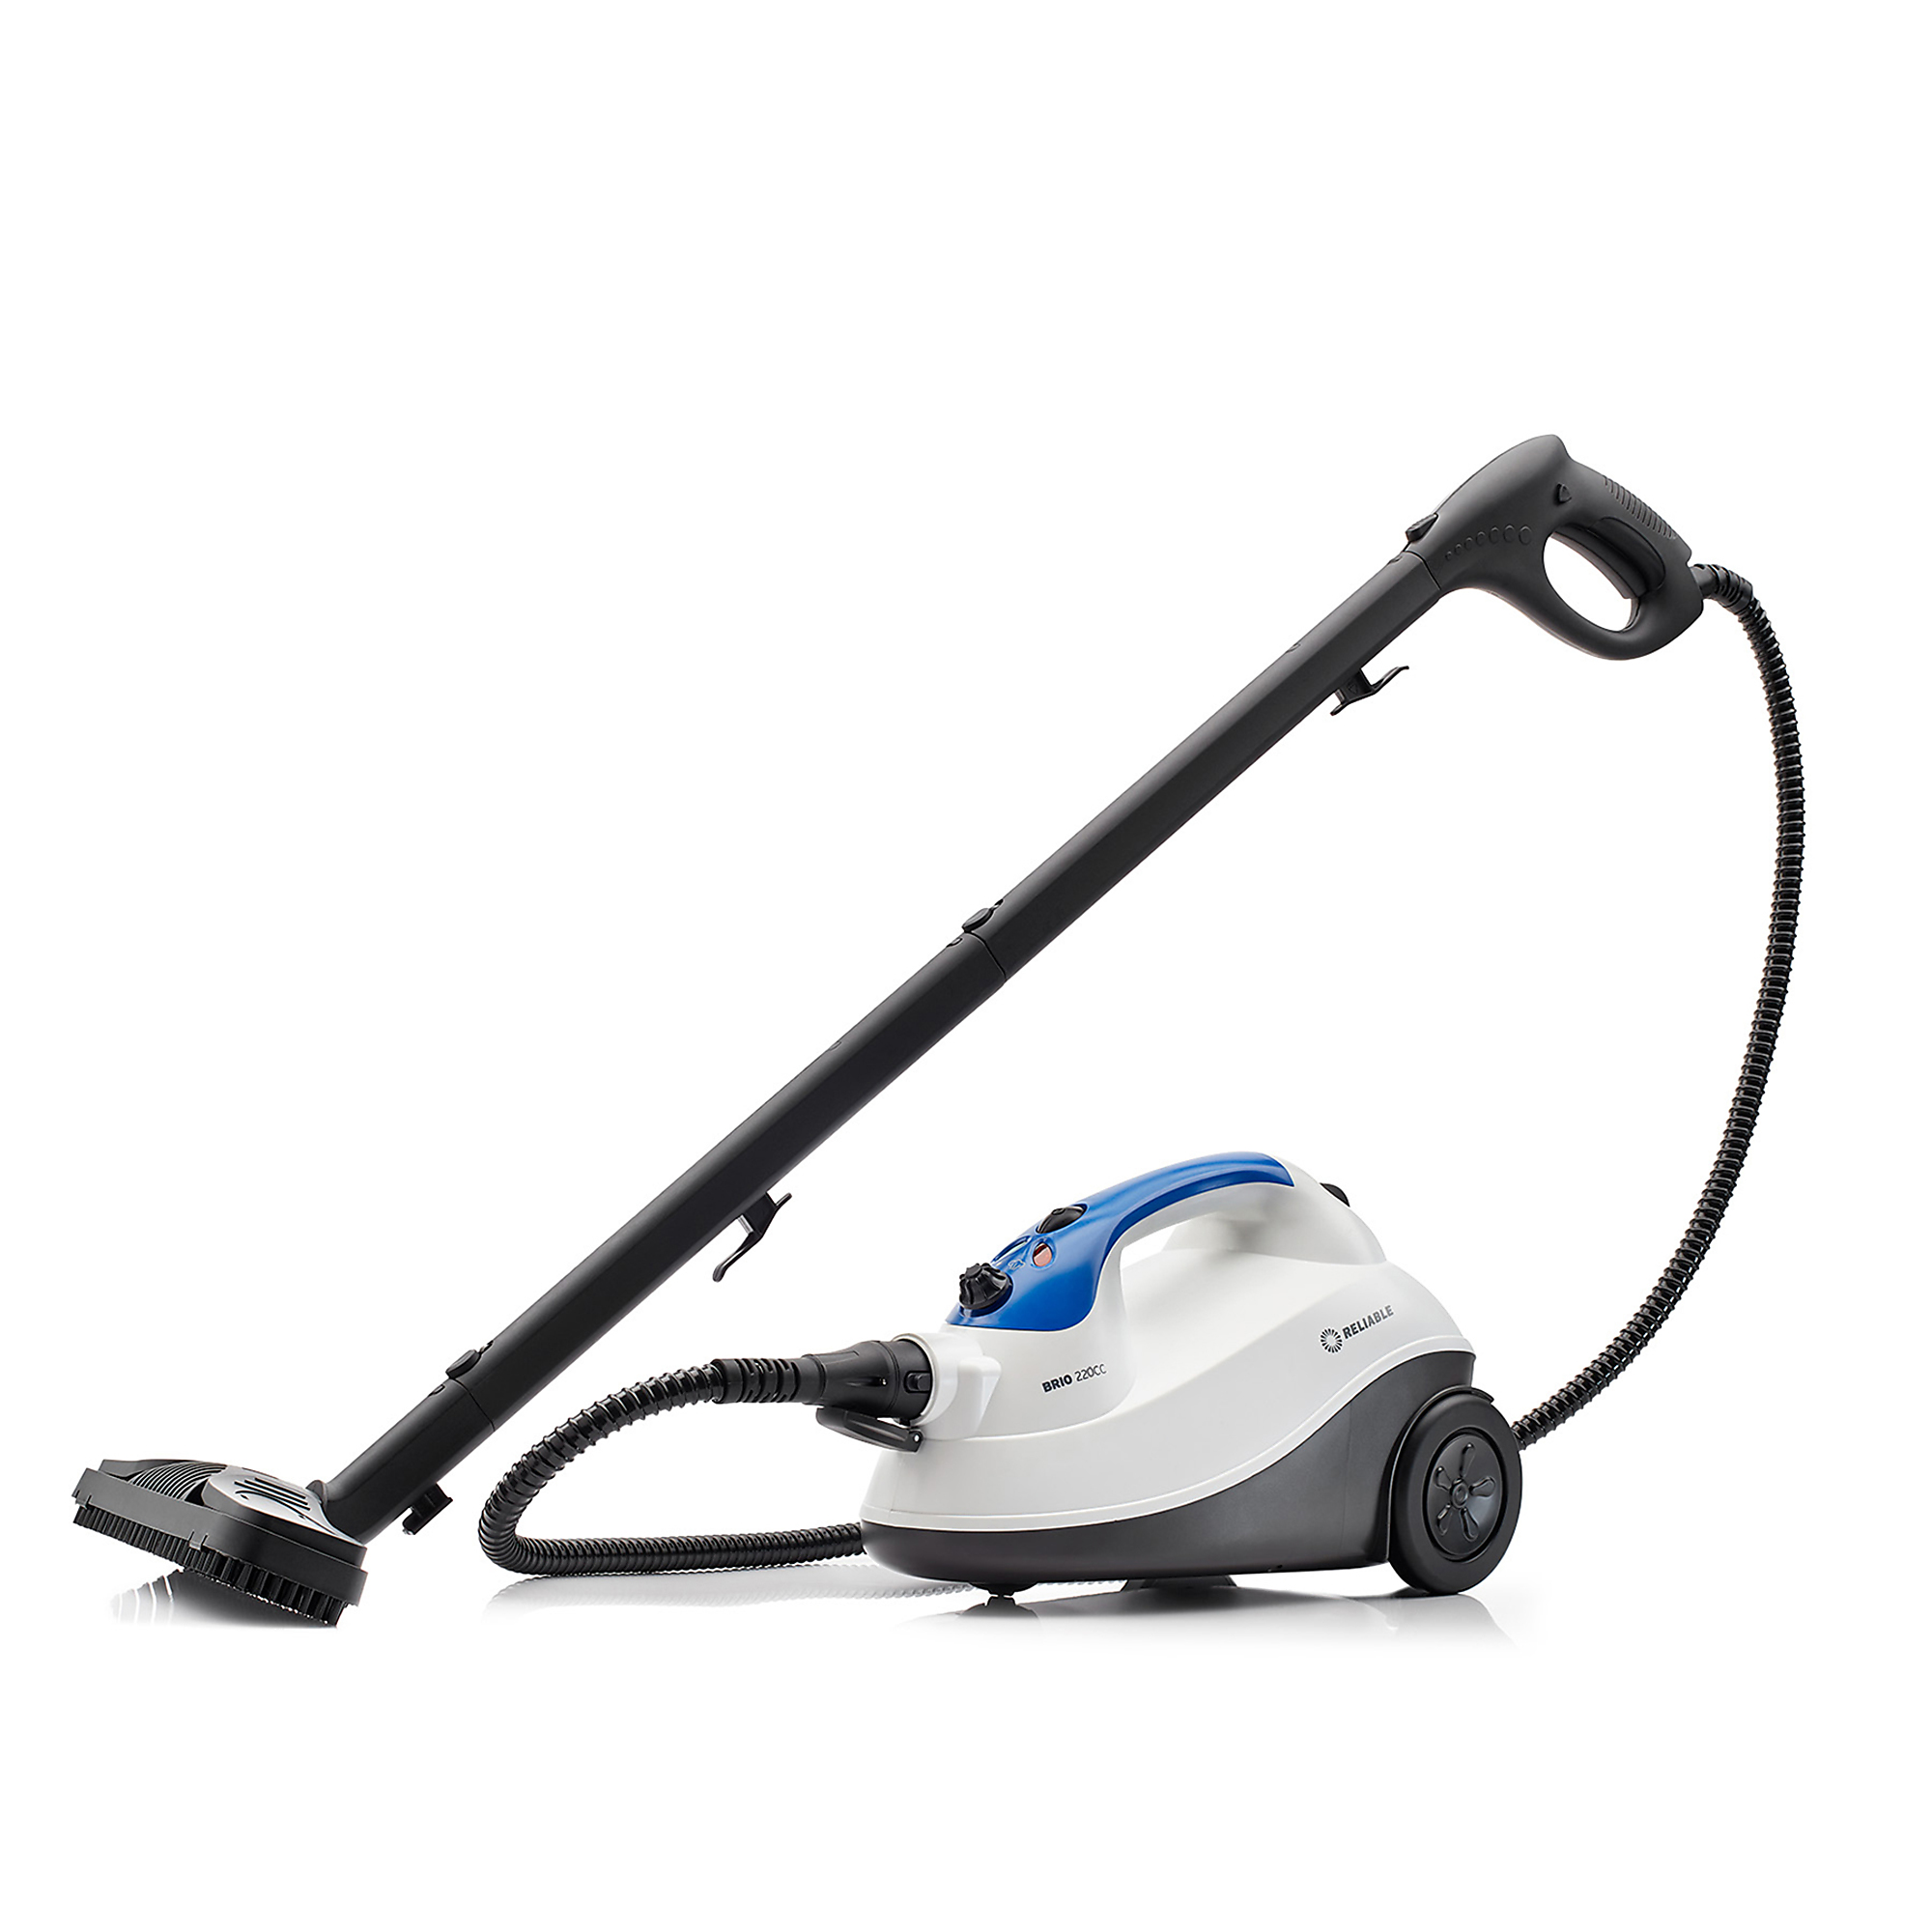 Reliable, BRIO Canister Steam Cleaner, Capacity 0.4 Gal, Max. Steam Pressure 65 PSI, Model 220CC